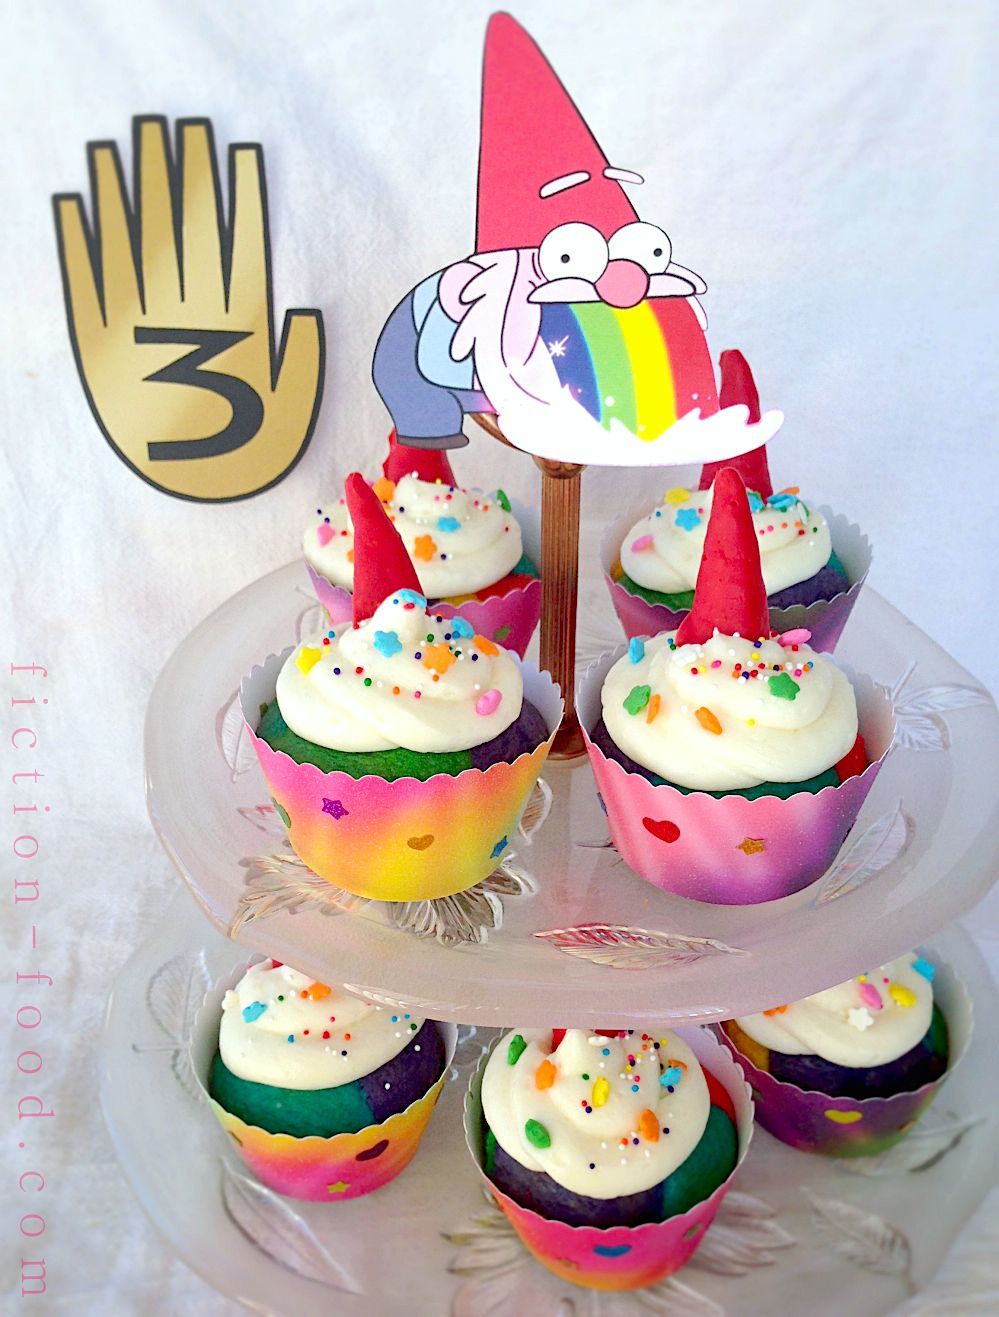 Food Adventures (in fiction!): Gnome Puke Cupcakes for “Gravity Falls”